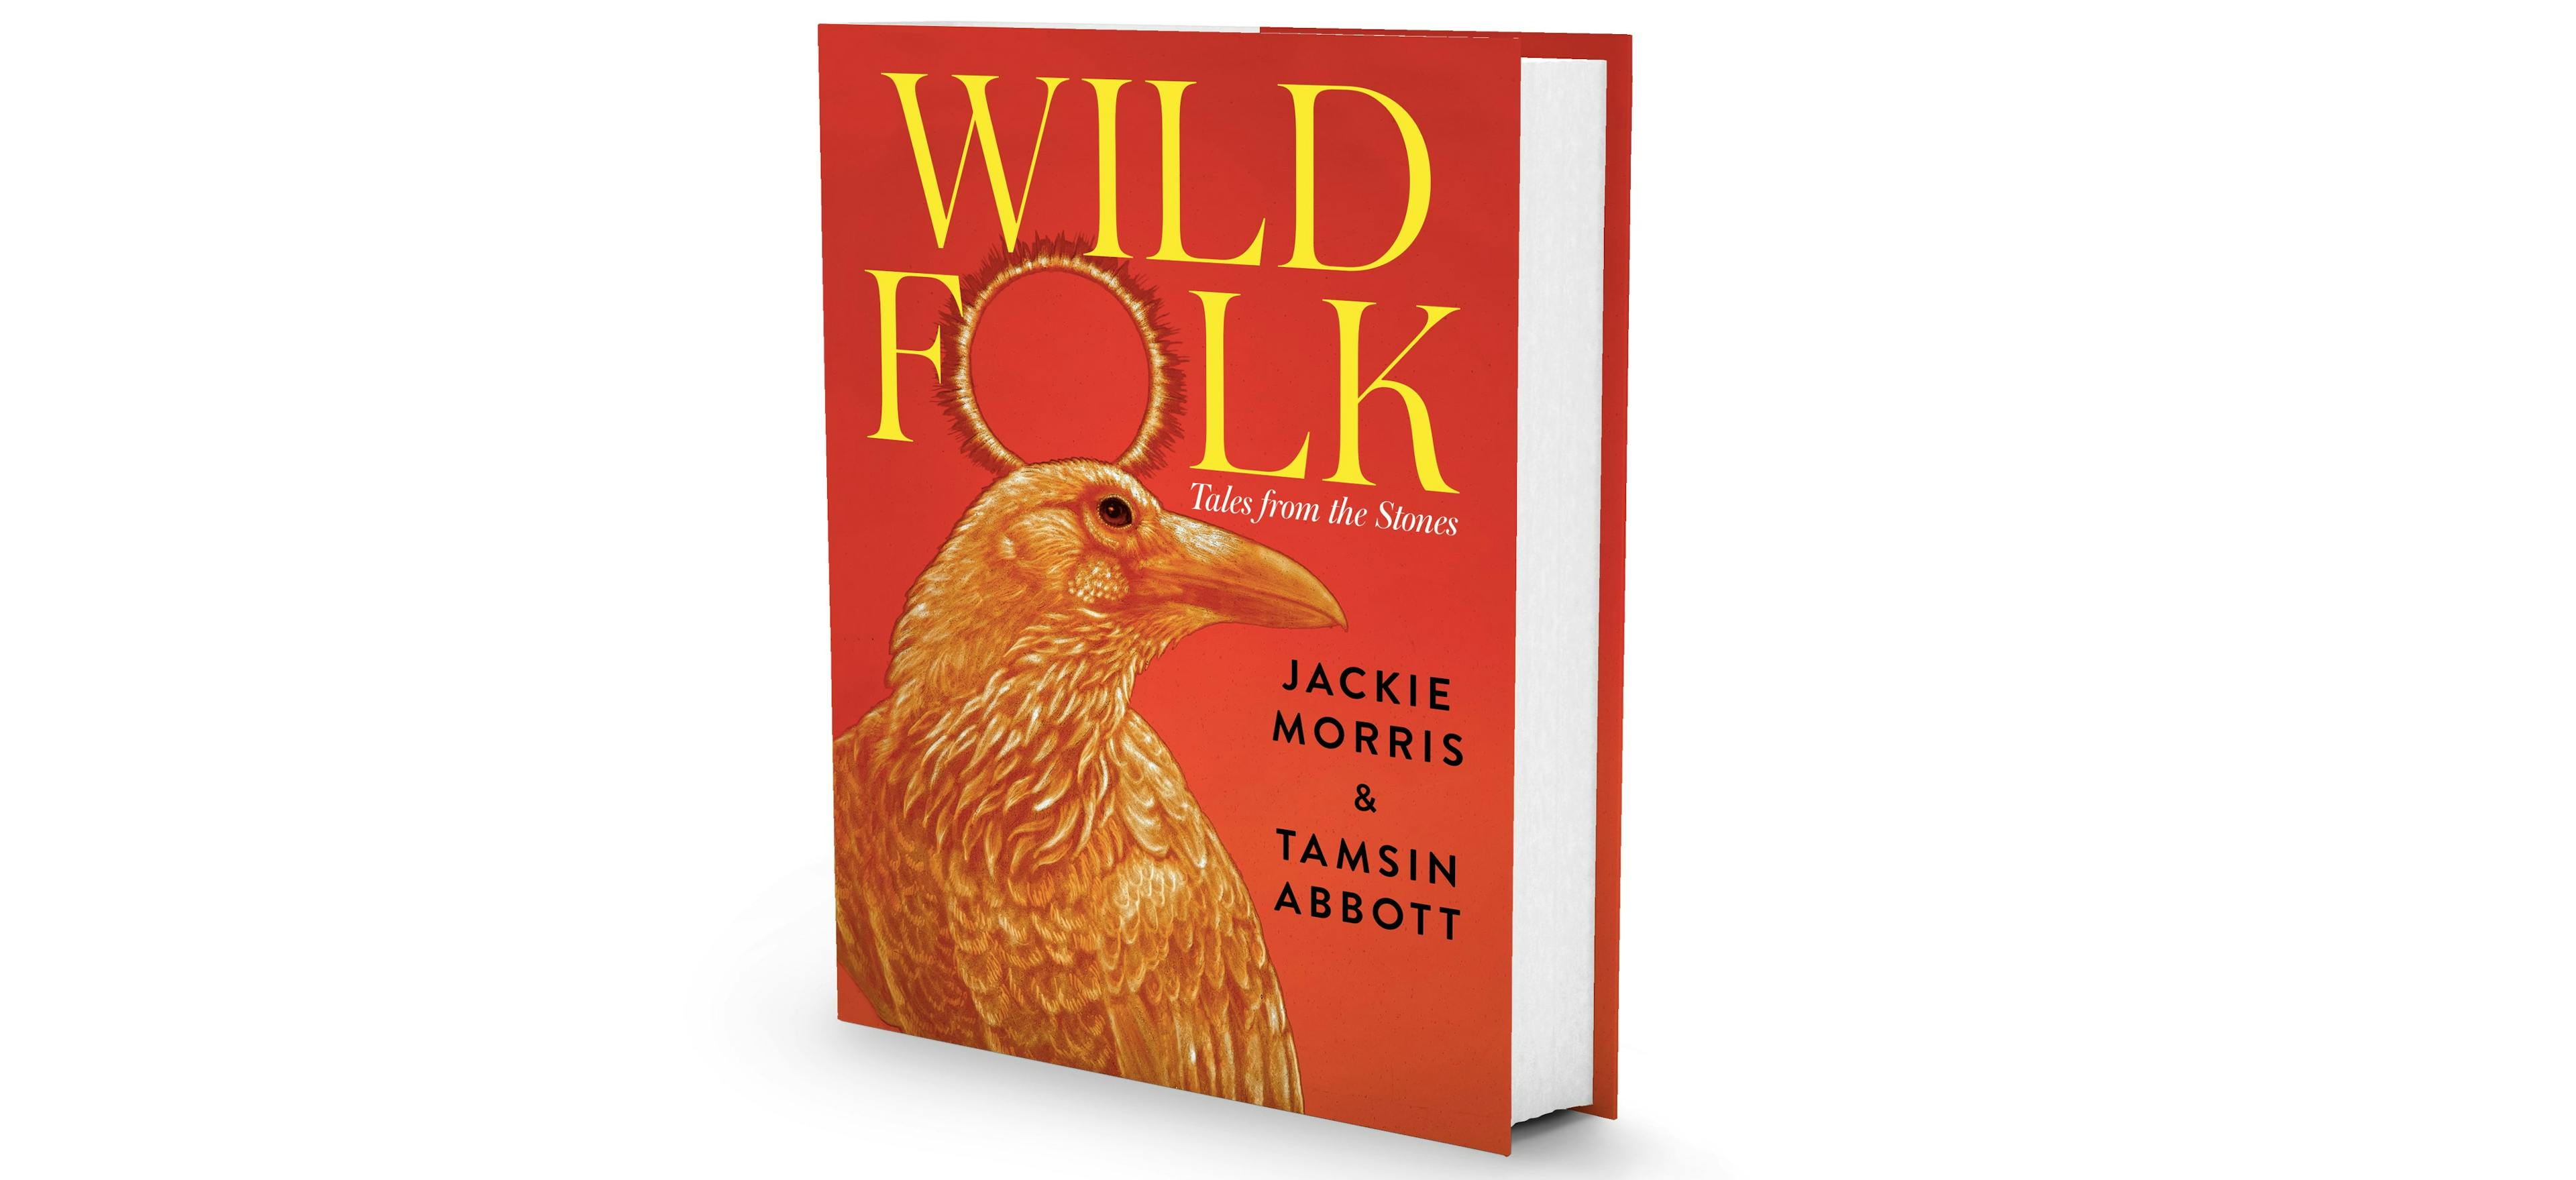 Wild Folk: Tales from the Stones